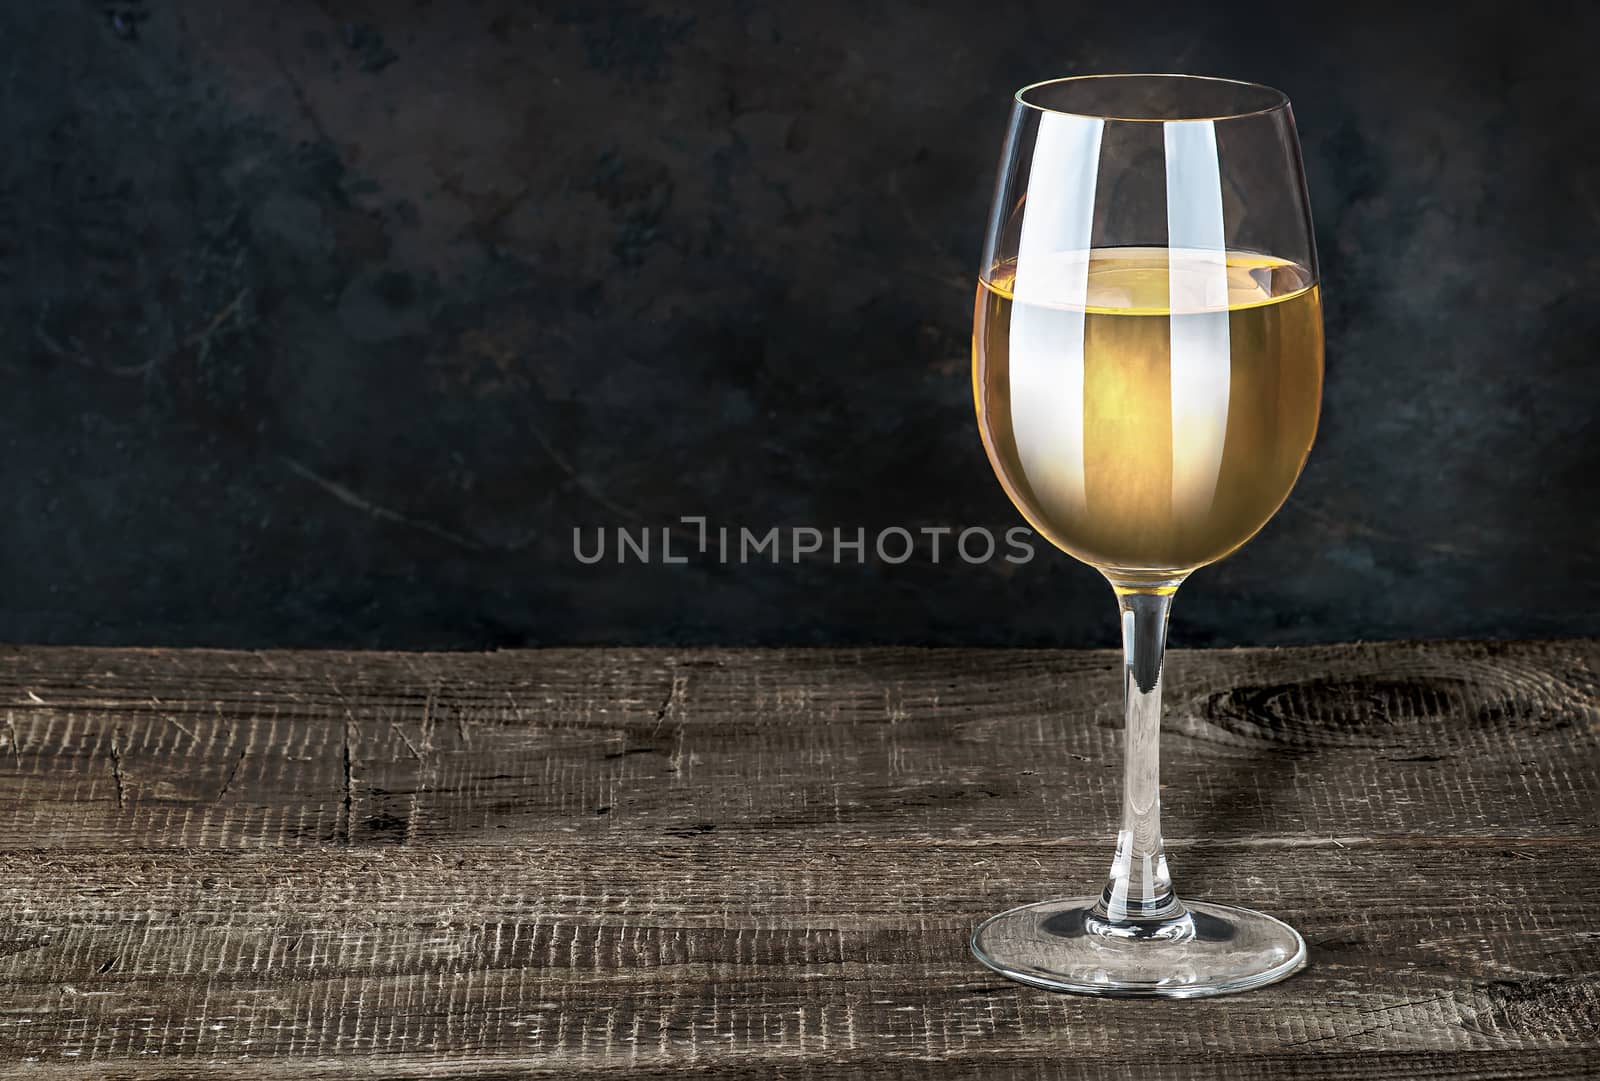 Glass of white wine on a wooden table. Dark background. Wooden table of plates.